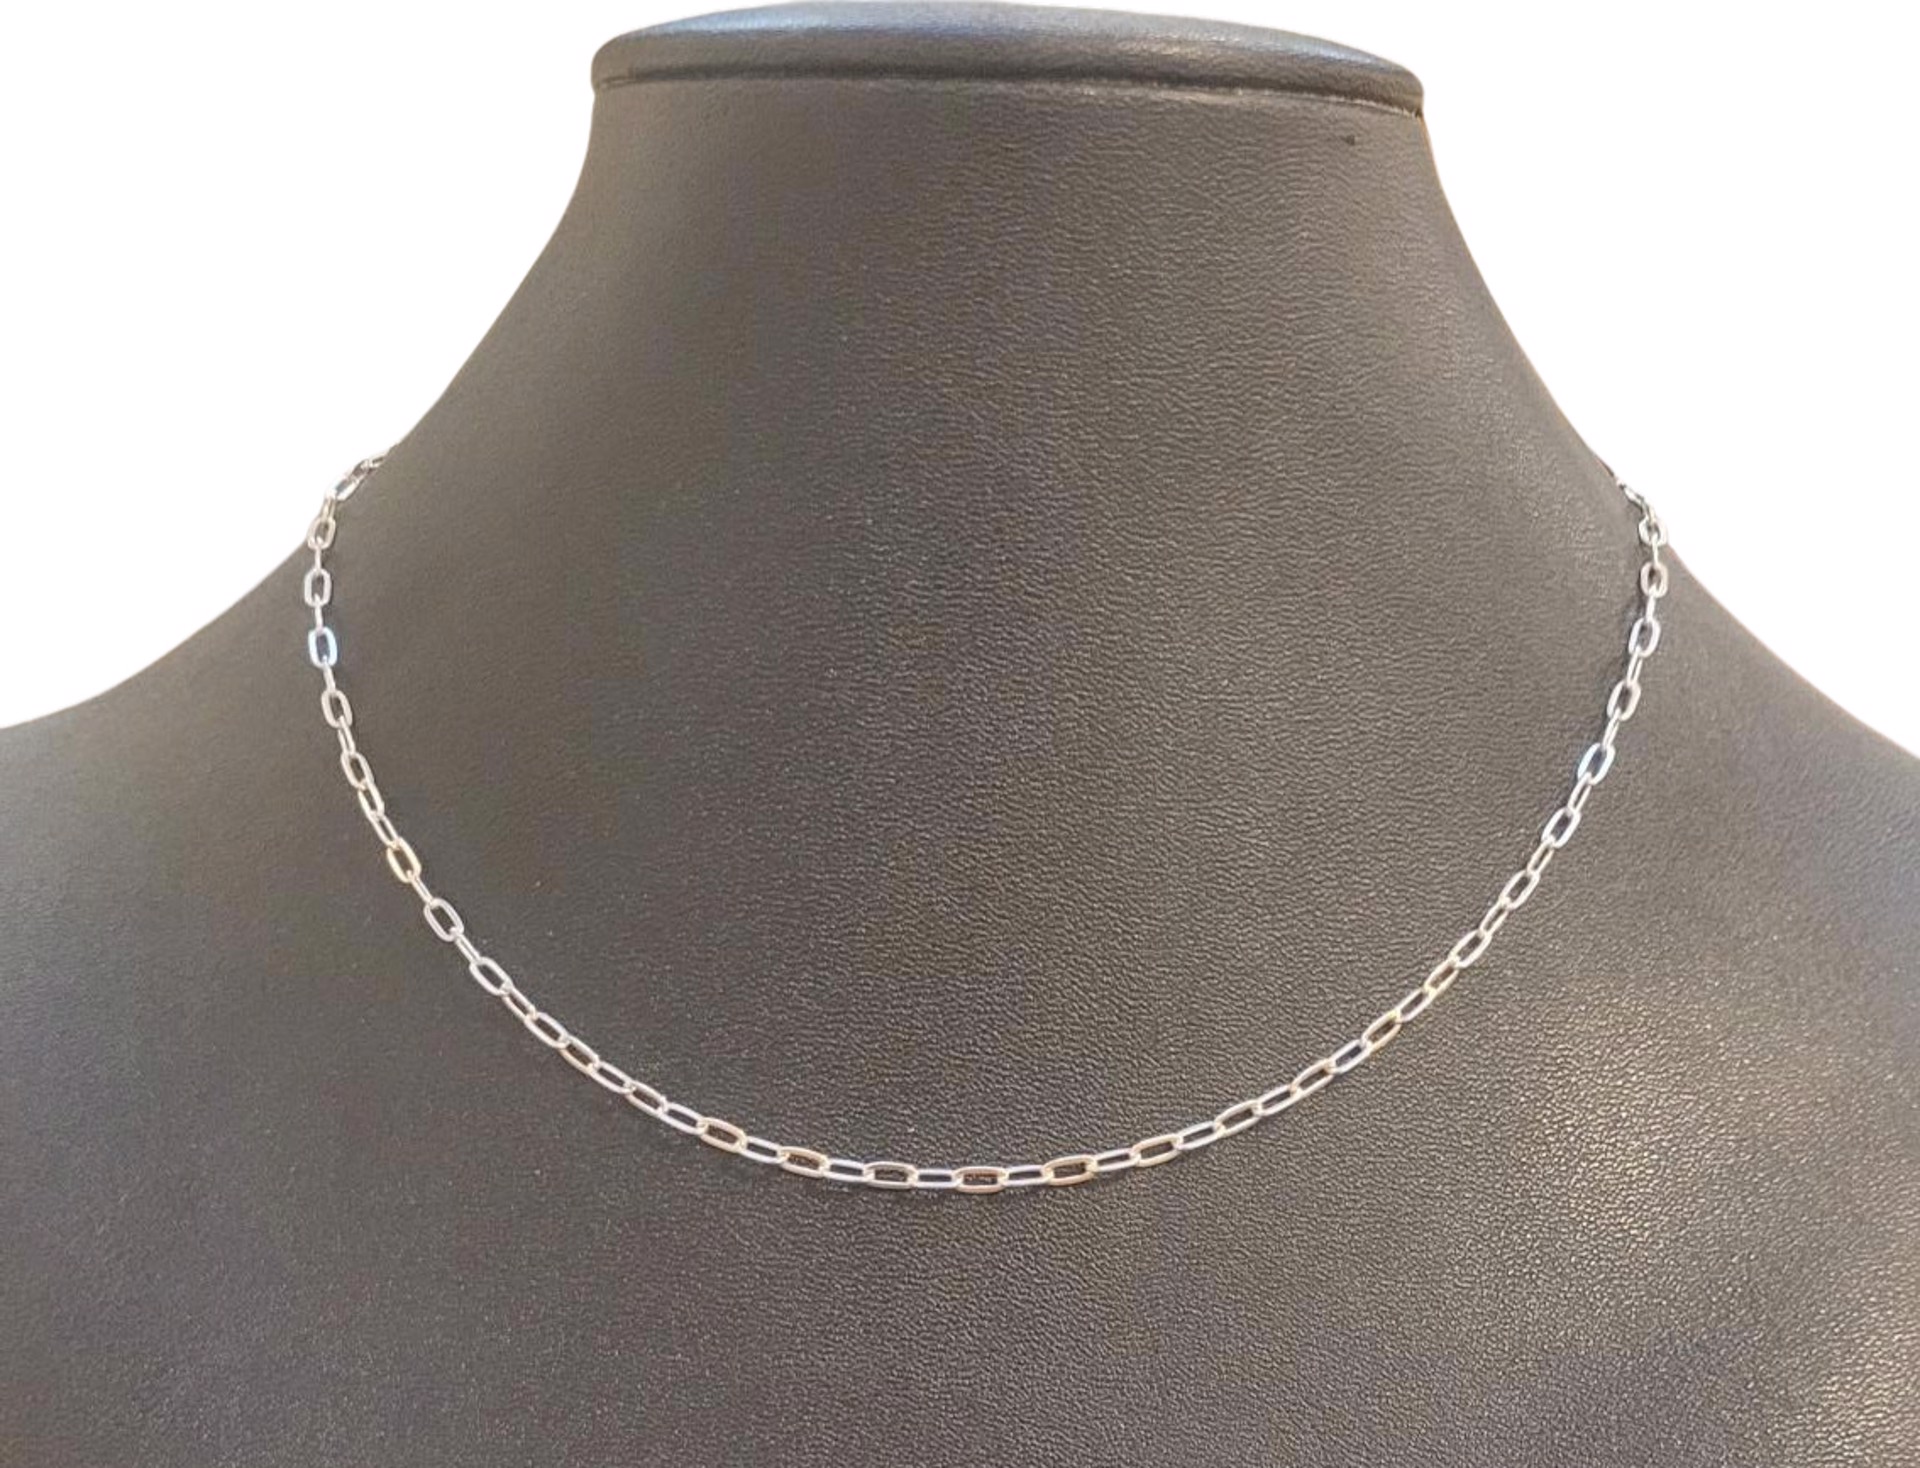 Necklace - Sterling Silver "Paperclip" Chain by Indigo Desert Ranch - Jewelry